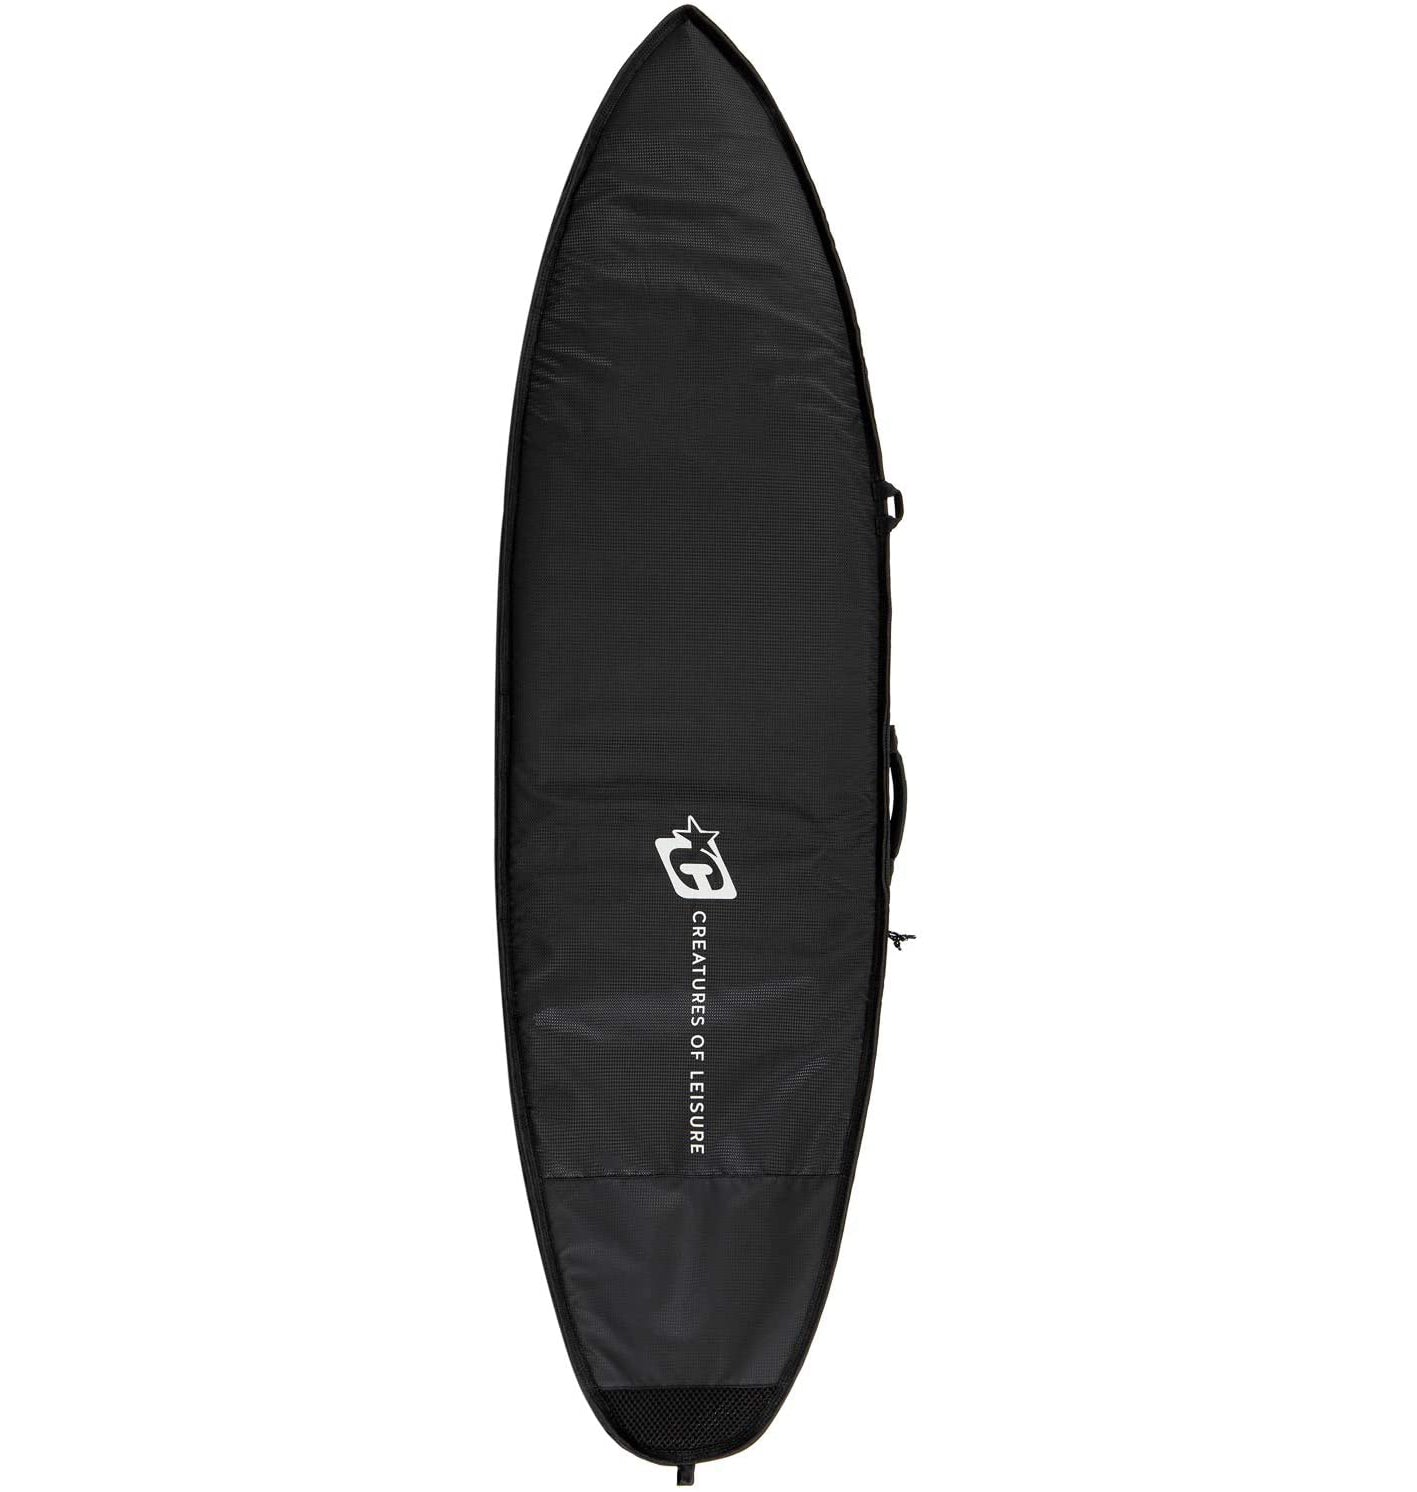 Creatures of Leisure Day Use DT2.0 Shortboard Boardbag Black-Silver 6ft3in